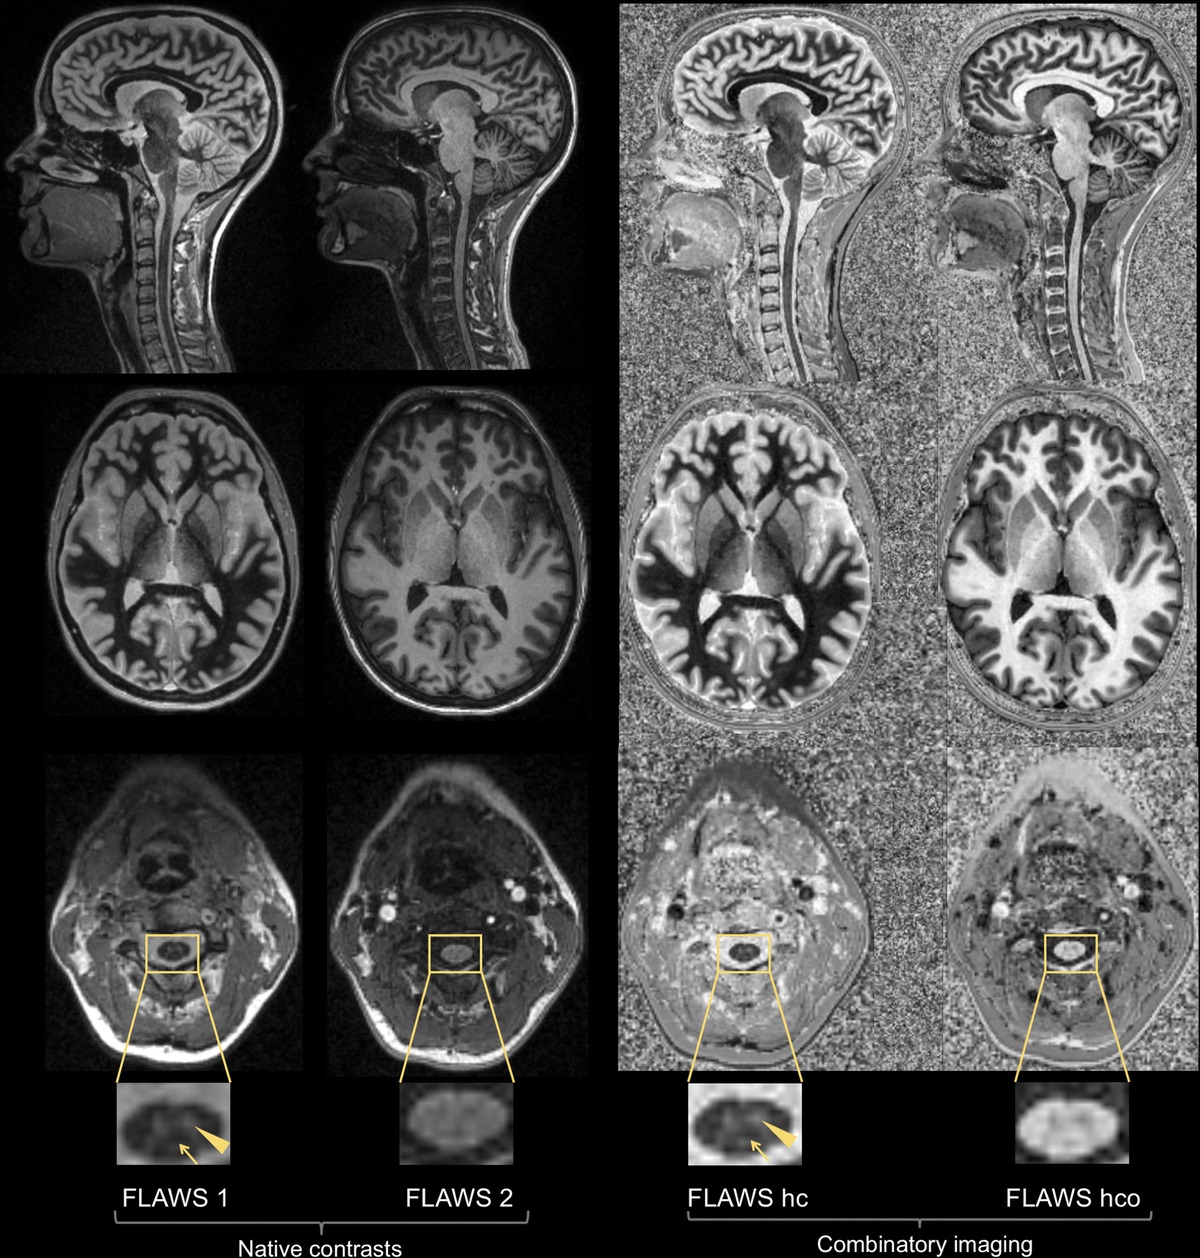 3-Dimensional Fluid and White Matter Suppression Magnetic Resonance Imaging Sequence Accelerated With Compressed Sensing Improves Multiple Sclerosis Cervical Spinal Cord Lesion Detection Compared With Standard 2-Dimensional Imaging